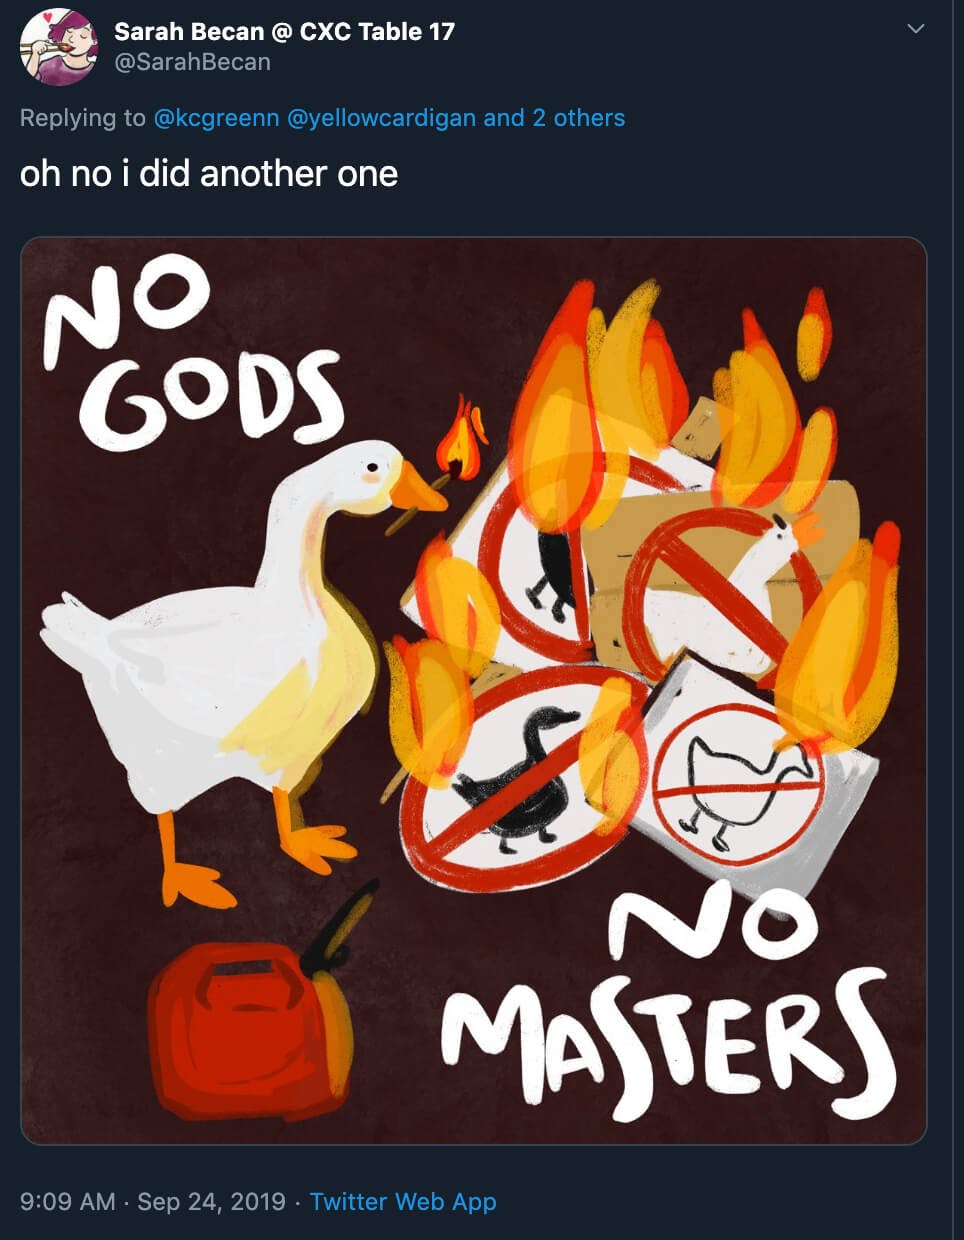 Untitled Goose Game fan art with "no gods no masters" over an image of a goose setting fire to "no geese" signs.